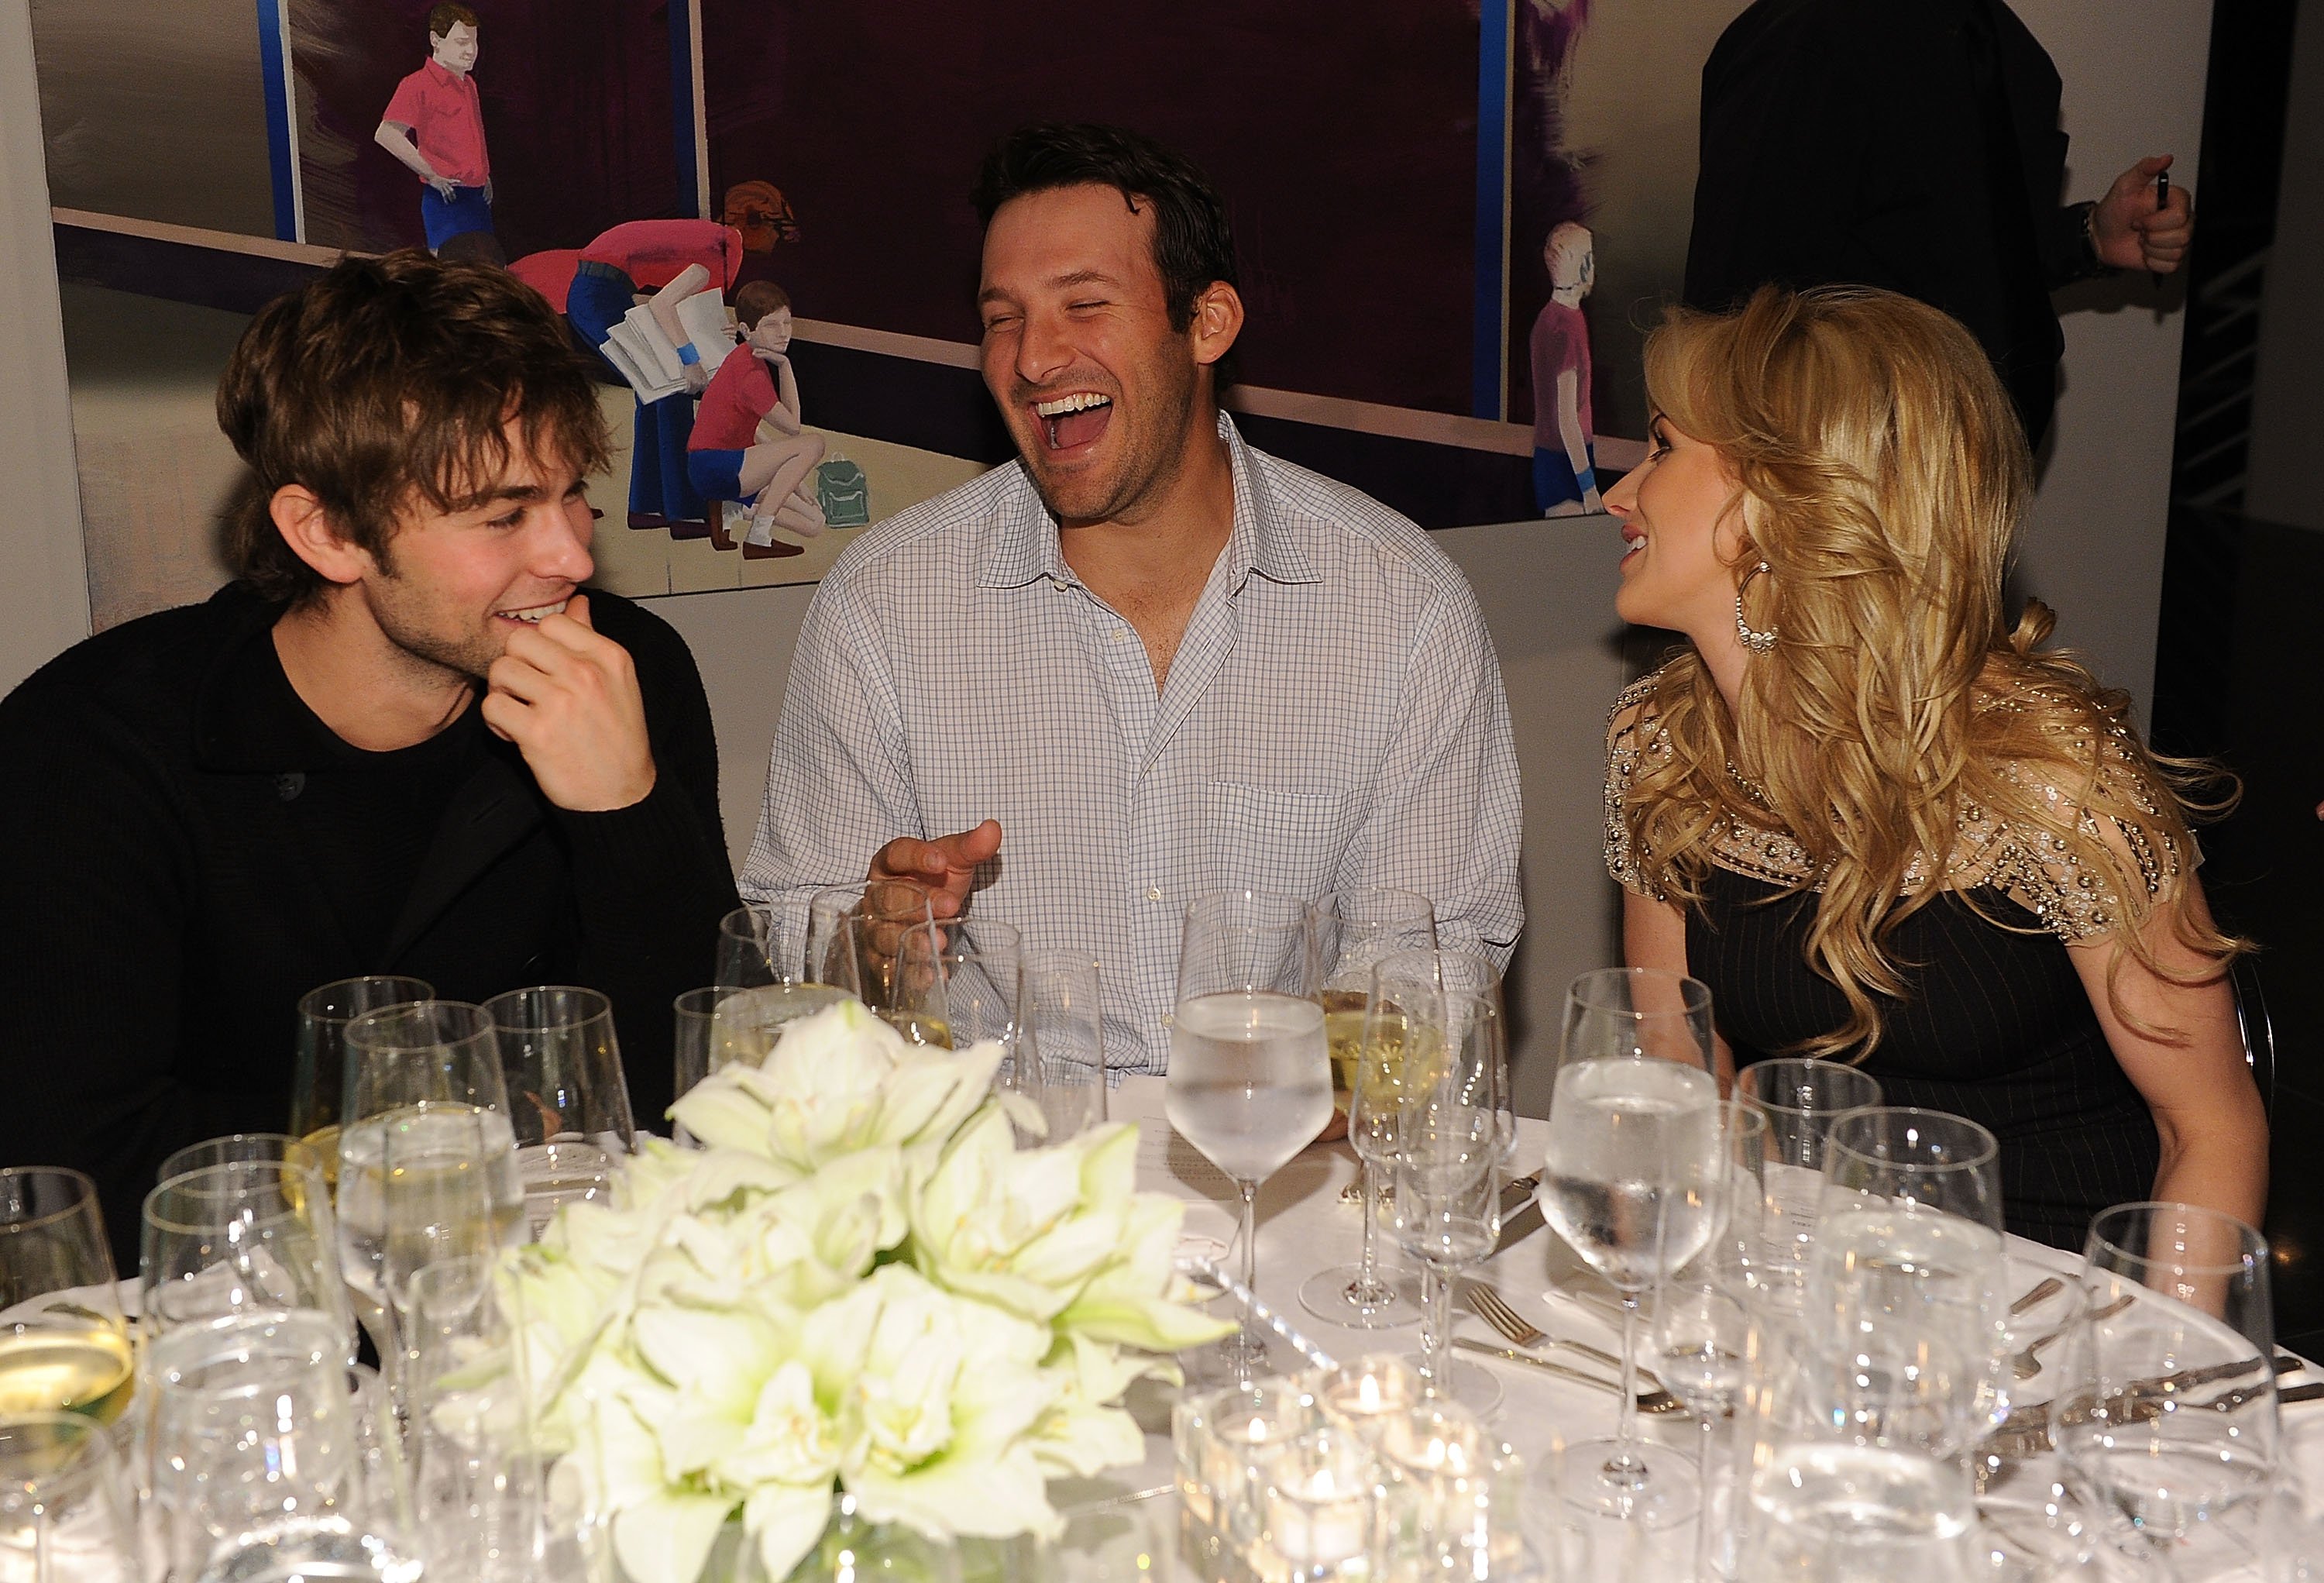 (L-R) Actor Chace Crawford, Dallas Cowboys Quarterback Tony Romo and television personality Candice Crawford attend a private dinner hosted by Audi during Super Bowl XLV Weekend at the Audi Forum Dallas on February 5, 2011 in Dallas, Texas. | Source: Getty Images 